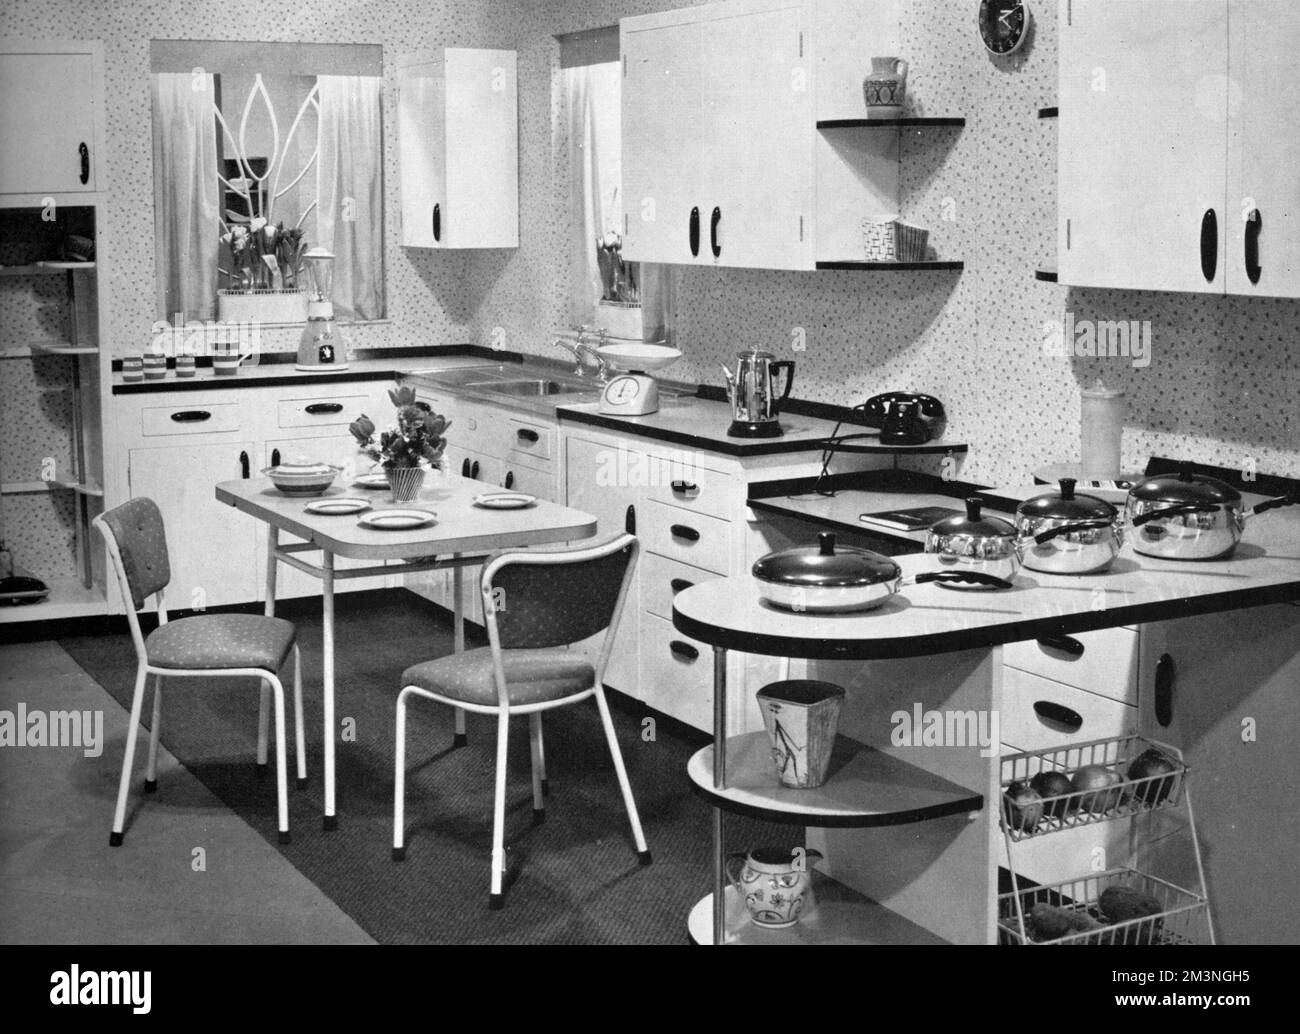 A smart Nevastane kitchen from 1957 featuring an L-shaped unit, Majestic table and chairs and various cabinets.  Also visible is a Colorama pan set, a coffee percolator, a Westclox clock, and a broom cupboard.       Date: 1957 Stock Photo